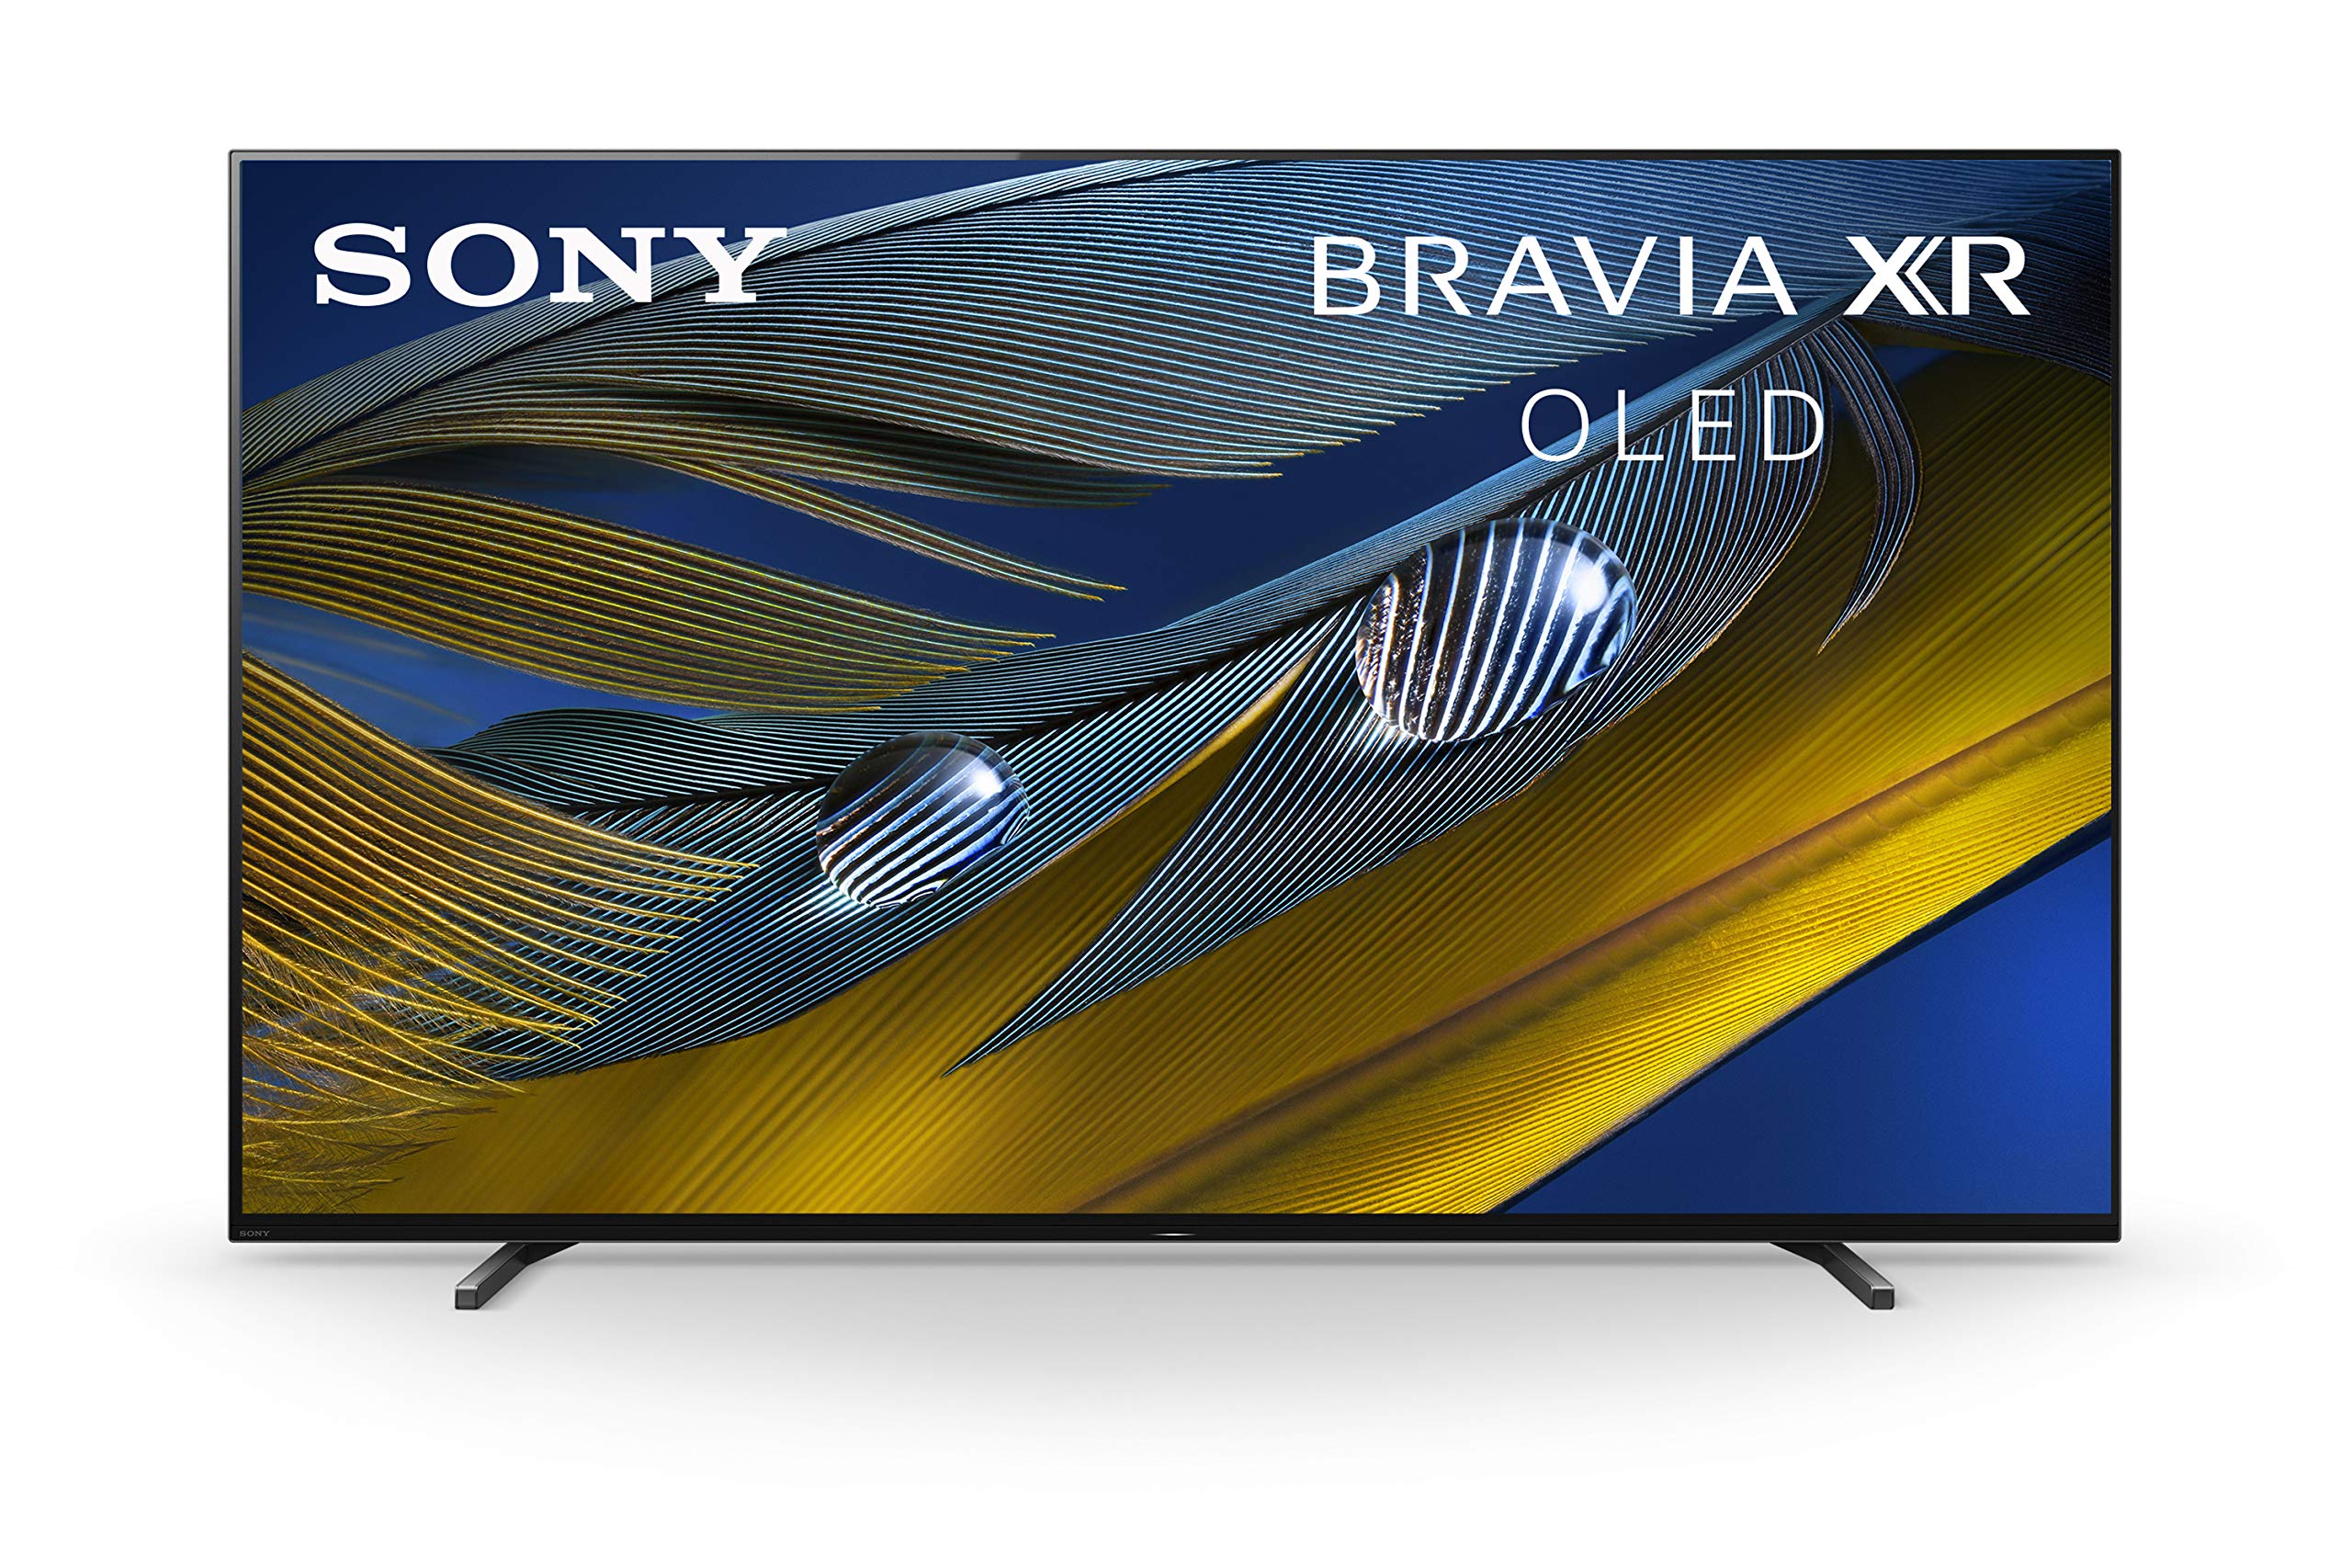 Sony A80CJ BRAVIA XR OLED Refurbished at Woot 65 inch $1489 and 77 inch at $2199